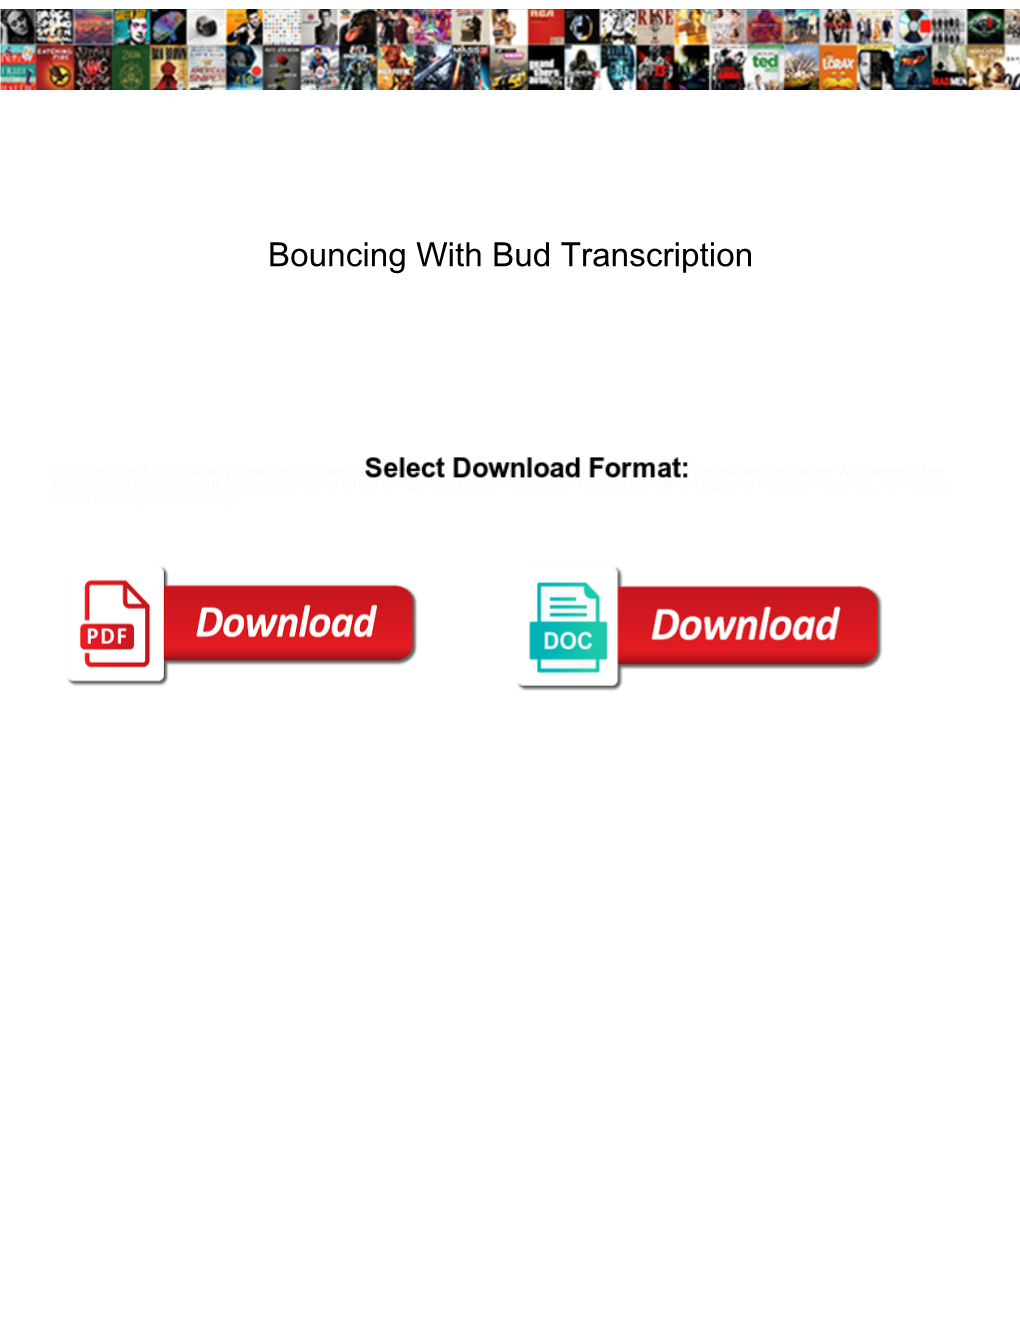 Bouncing with Bud Transcription